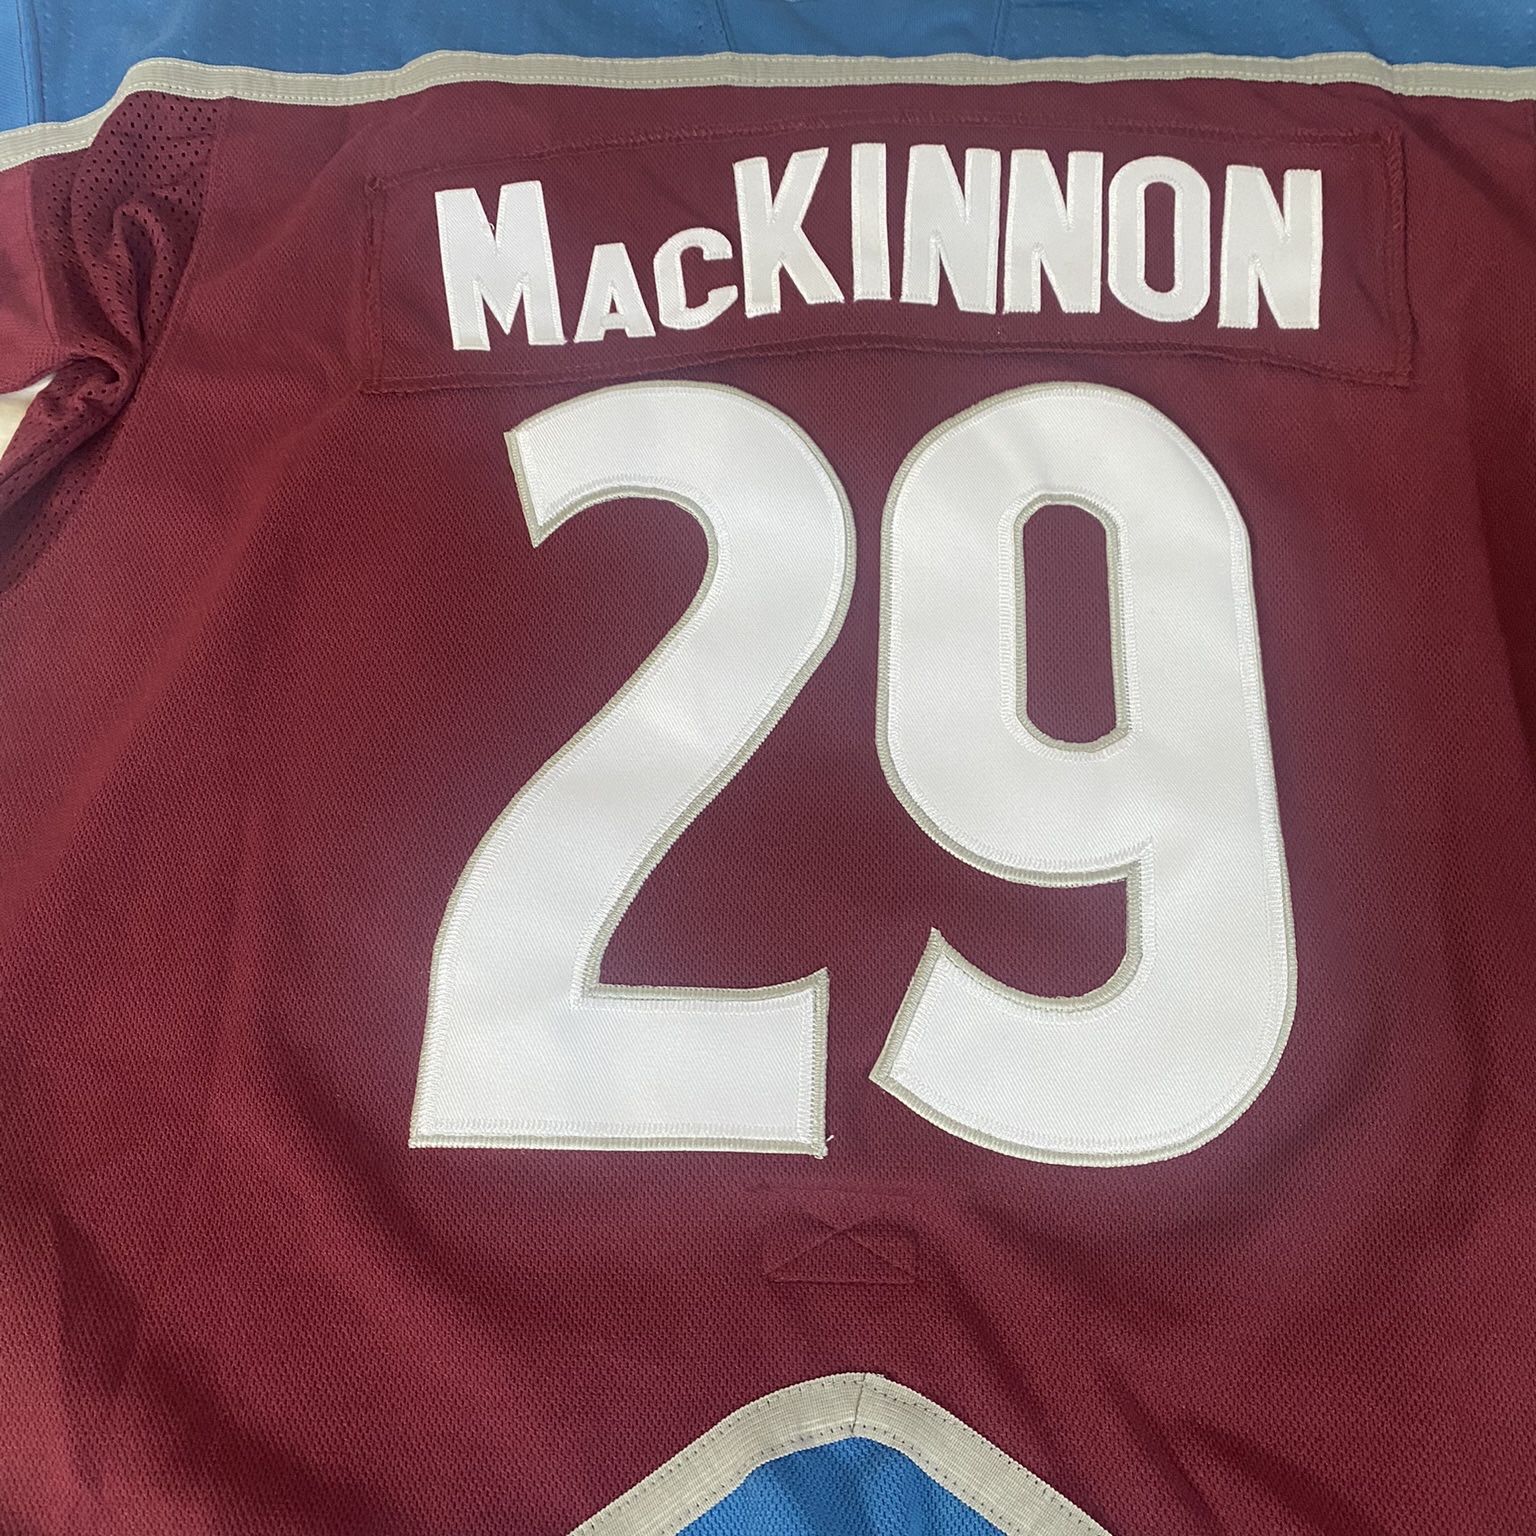 Colorado Avalanche jerseys #8 Makar & #29 MacKinnon Sizes Small Up To 5XL  for Sale in Fort Mill, SC - OfferUp